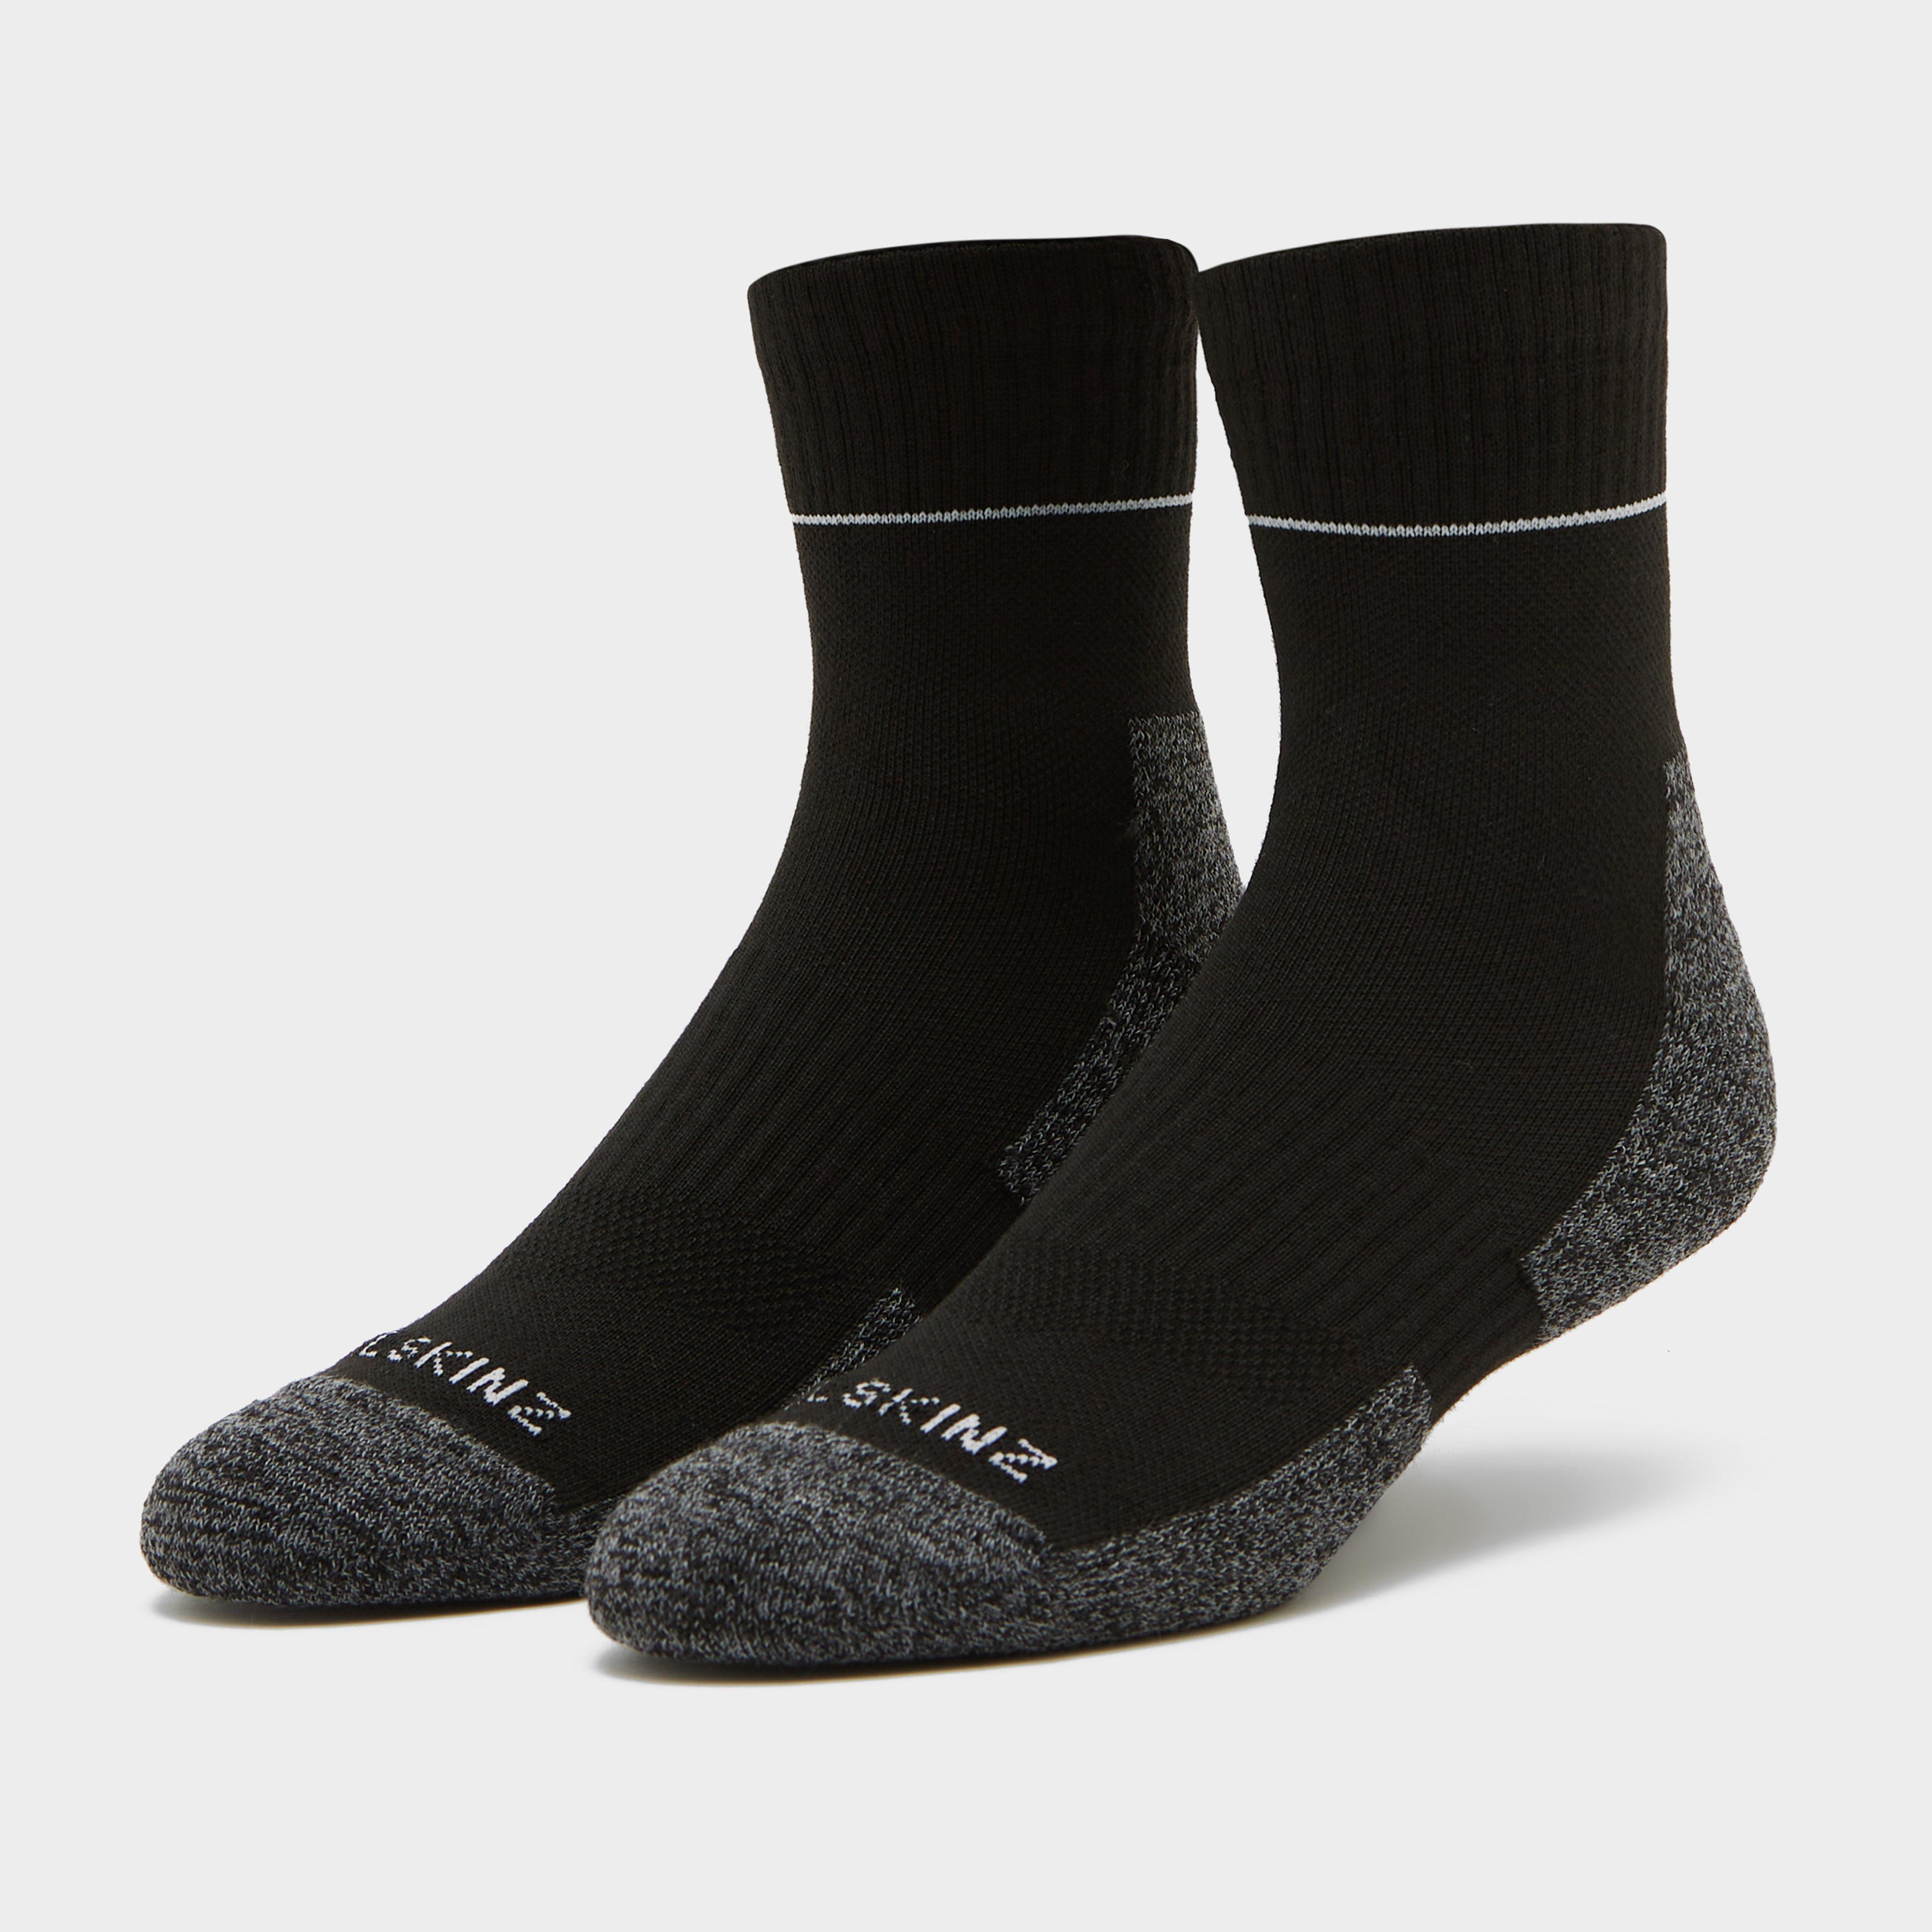 Go Outdoors Sealskinz Quick Dry Ankle Socks, Black